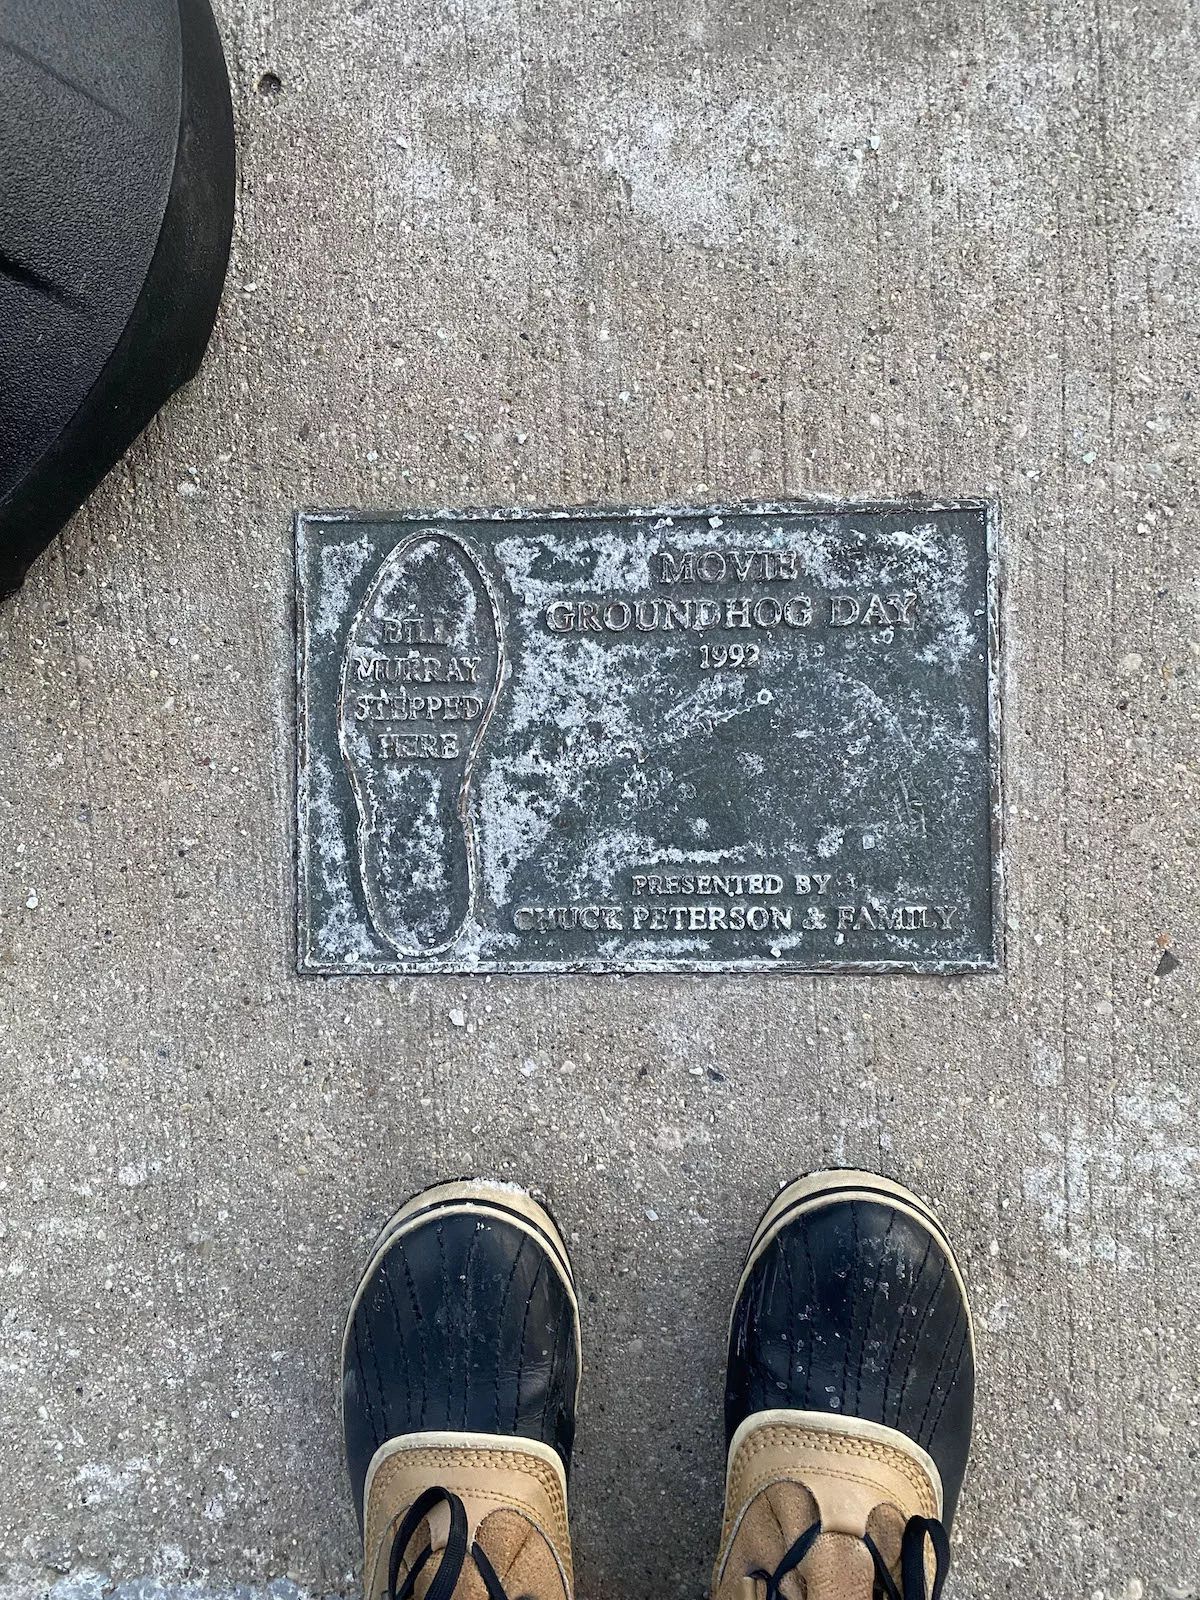 Plaque marking where Bill Murray stepped in Groundhog Day in Woodstock, Illinois